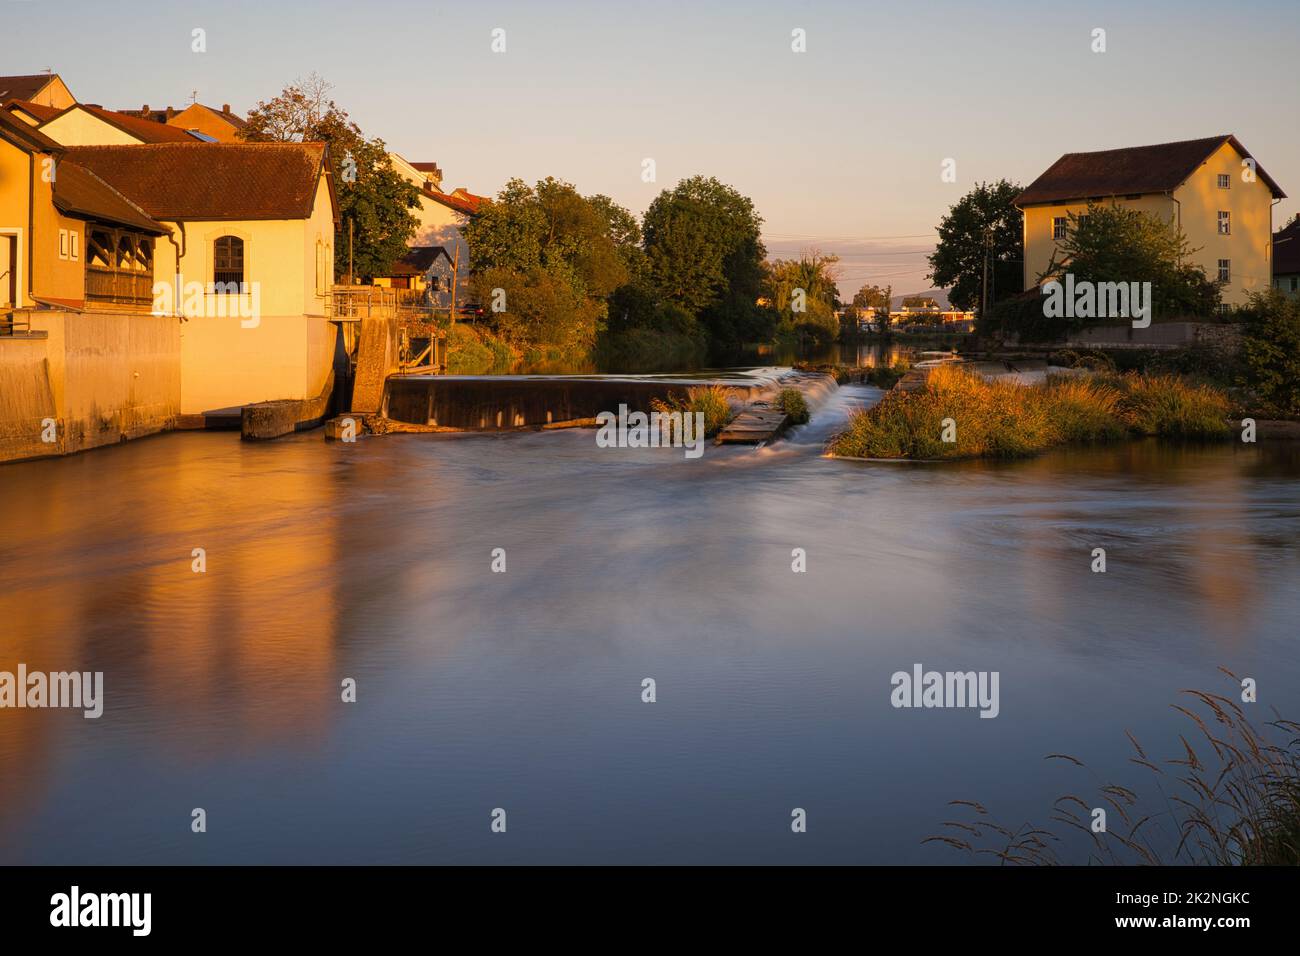 River Regen in Cham, a town in the Upper Palatinate, Bavaria, Germany. Golden hour Stock Photo